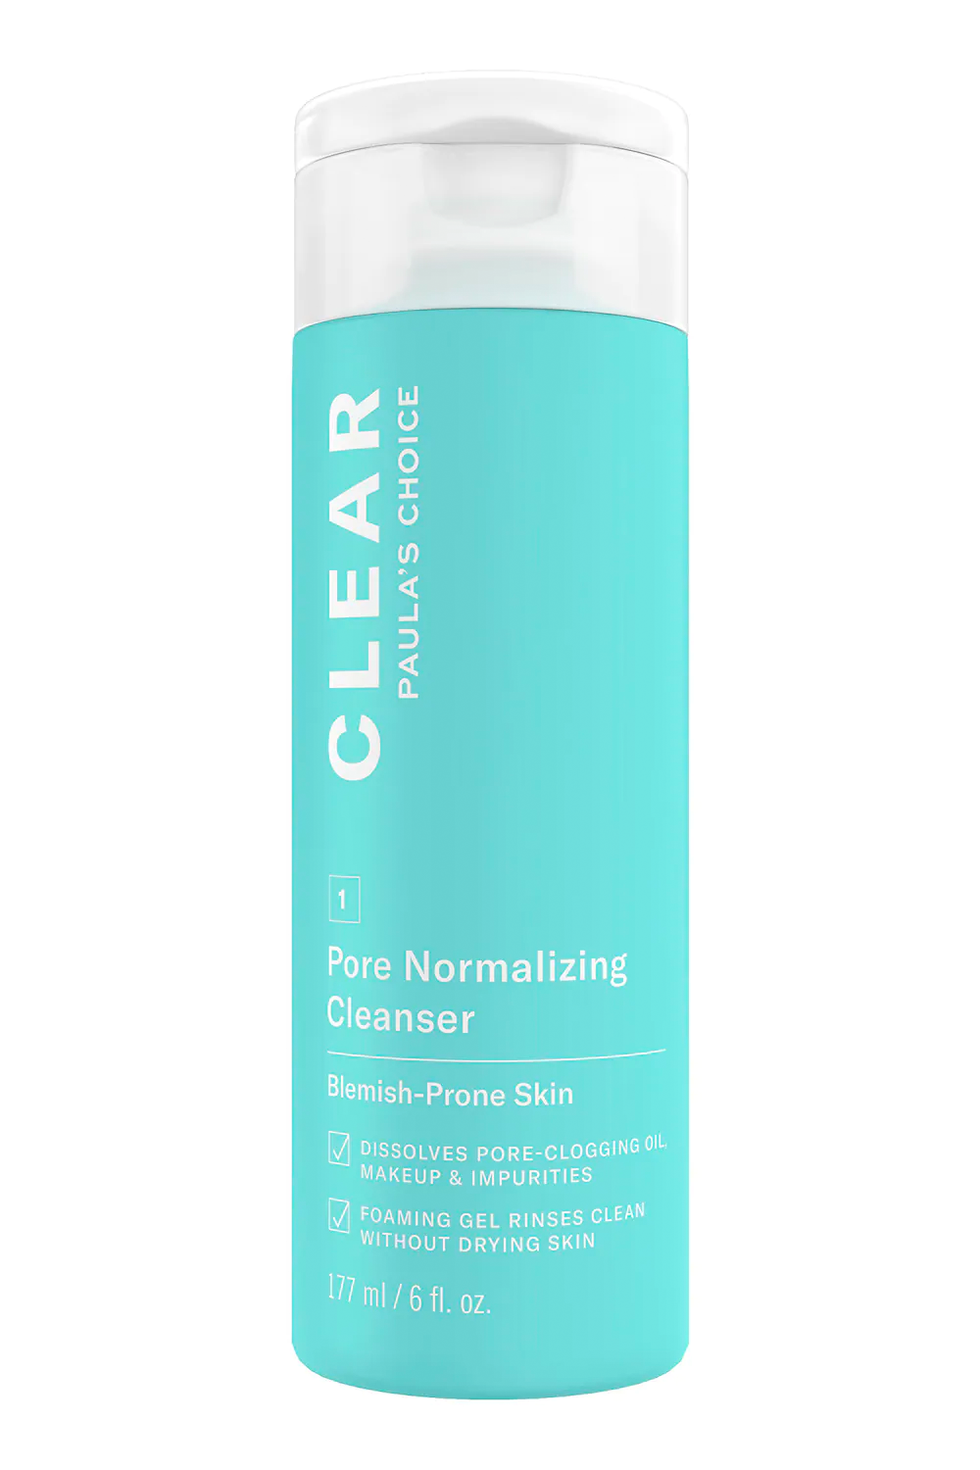 Paula's Choice Clear Pore Normalizing Acne Cleanser